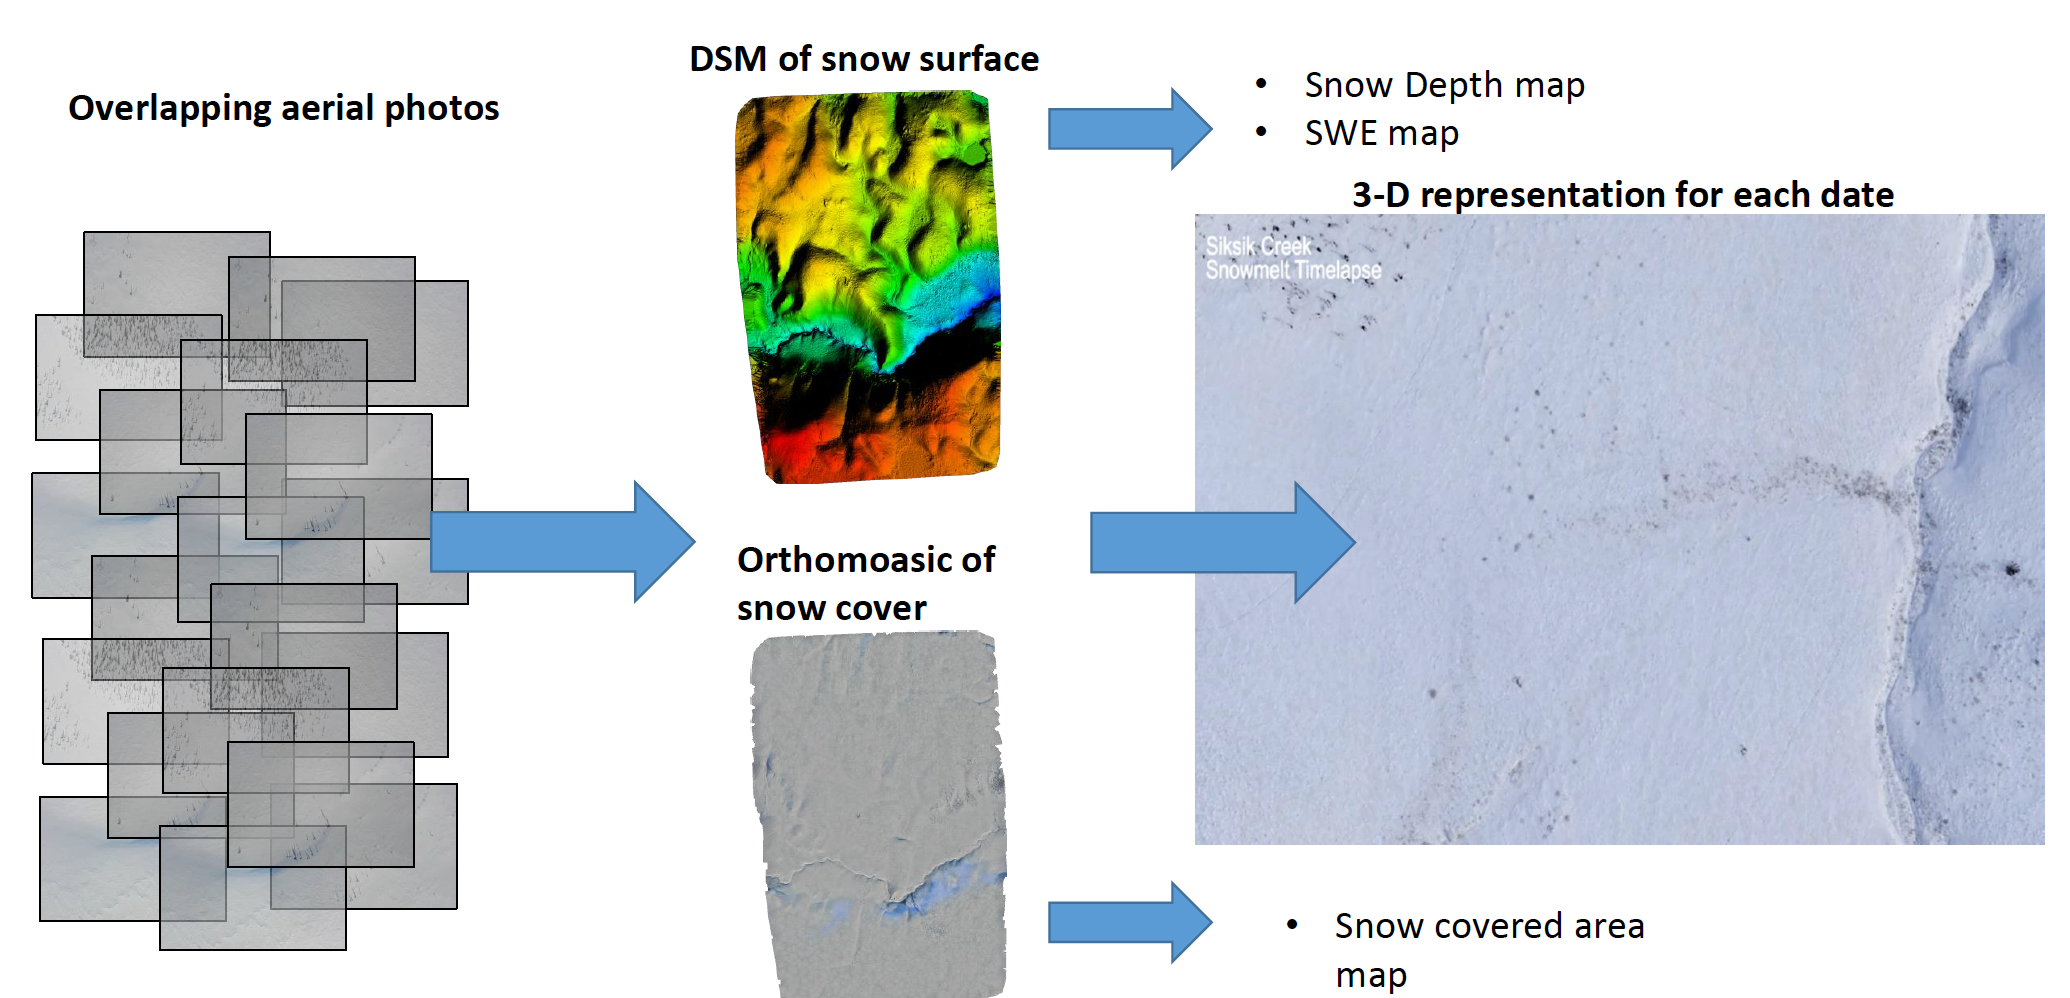 Mapping snow depth using structure-from-motion photogrammetry and unmanned aerial vechicles, image credit: Branden Walker